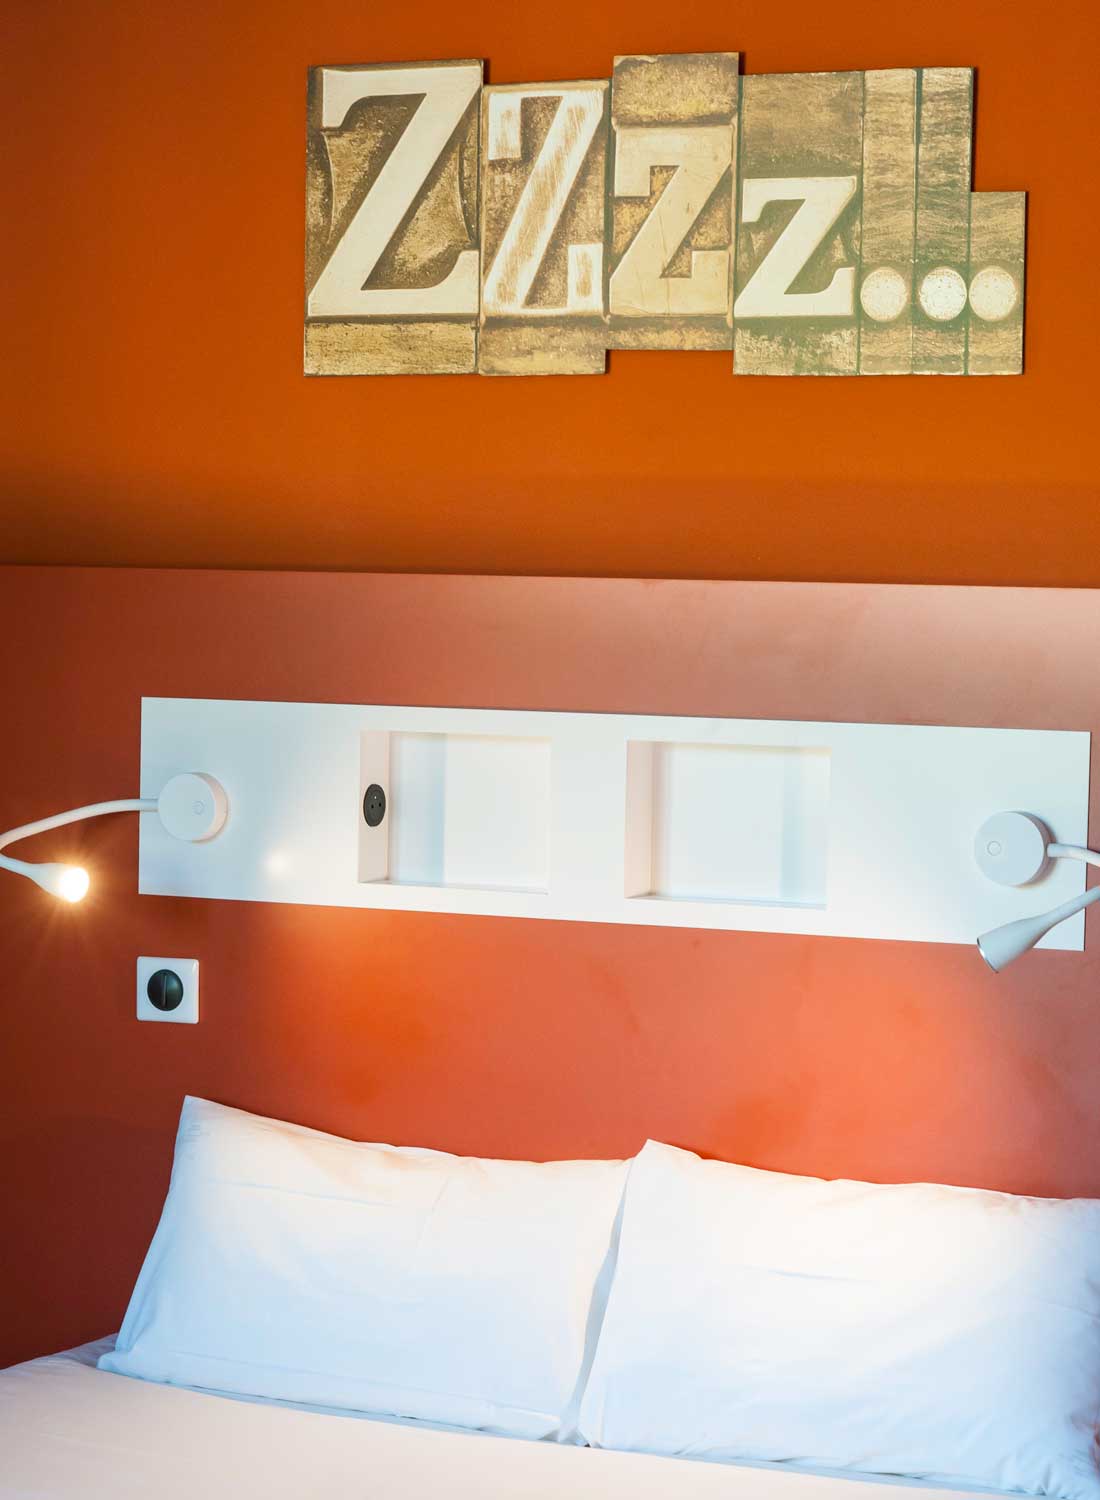 Groupe MyHotels – Ibis Château Thierry – Lit